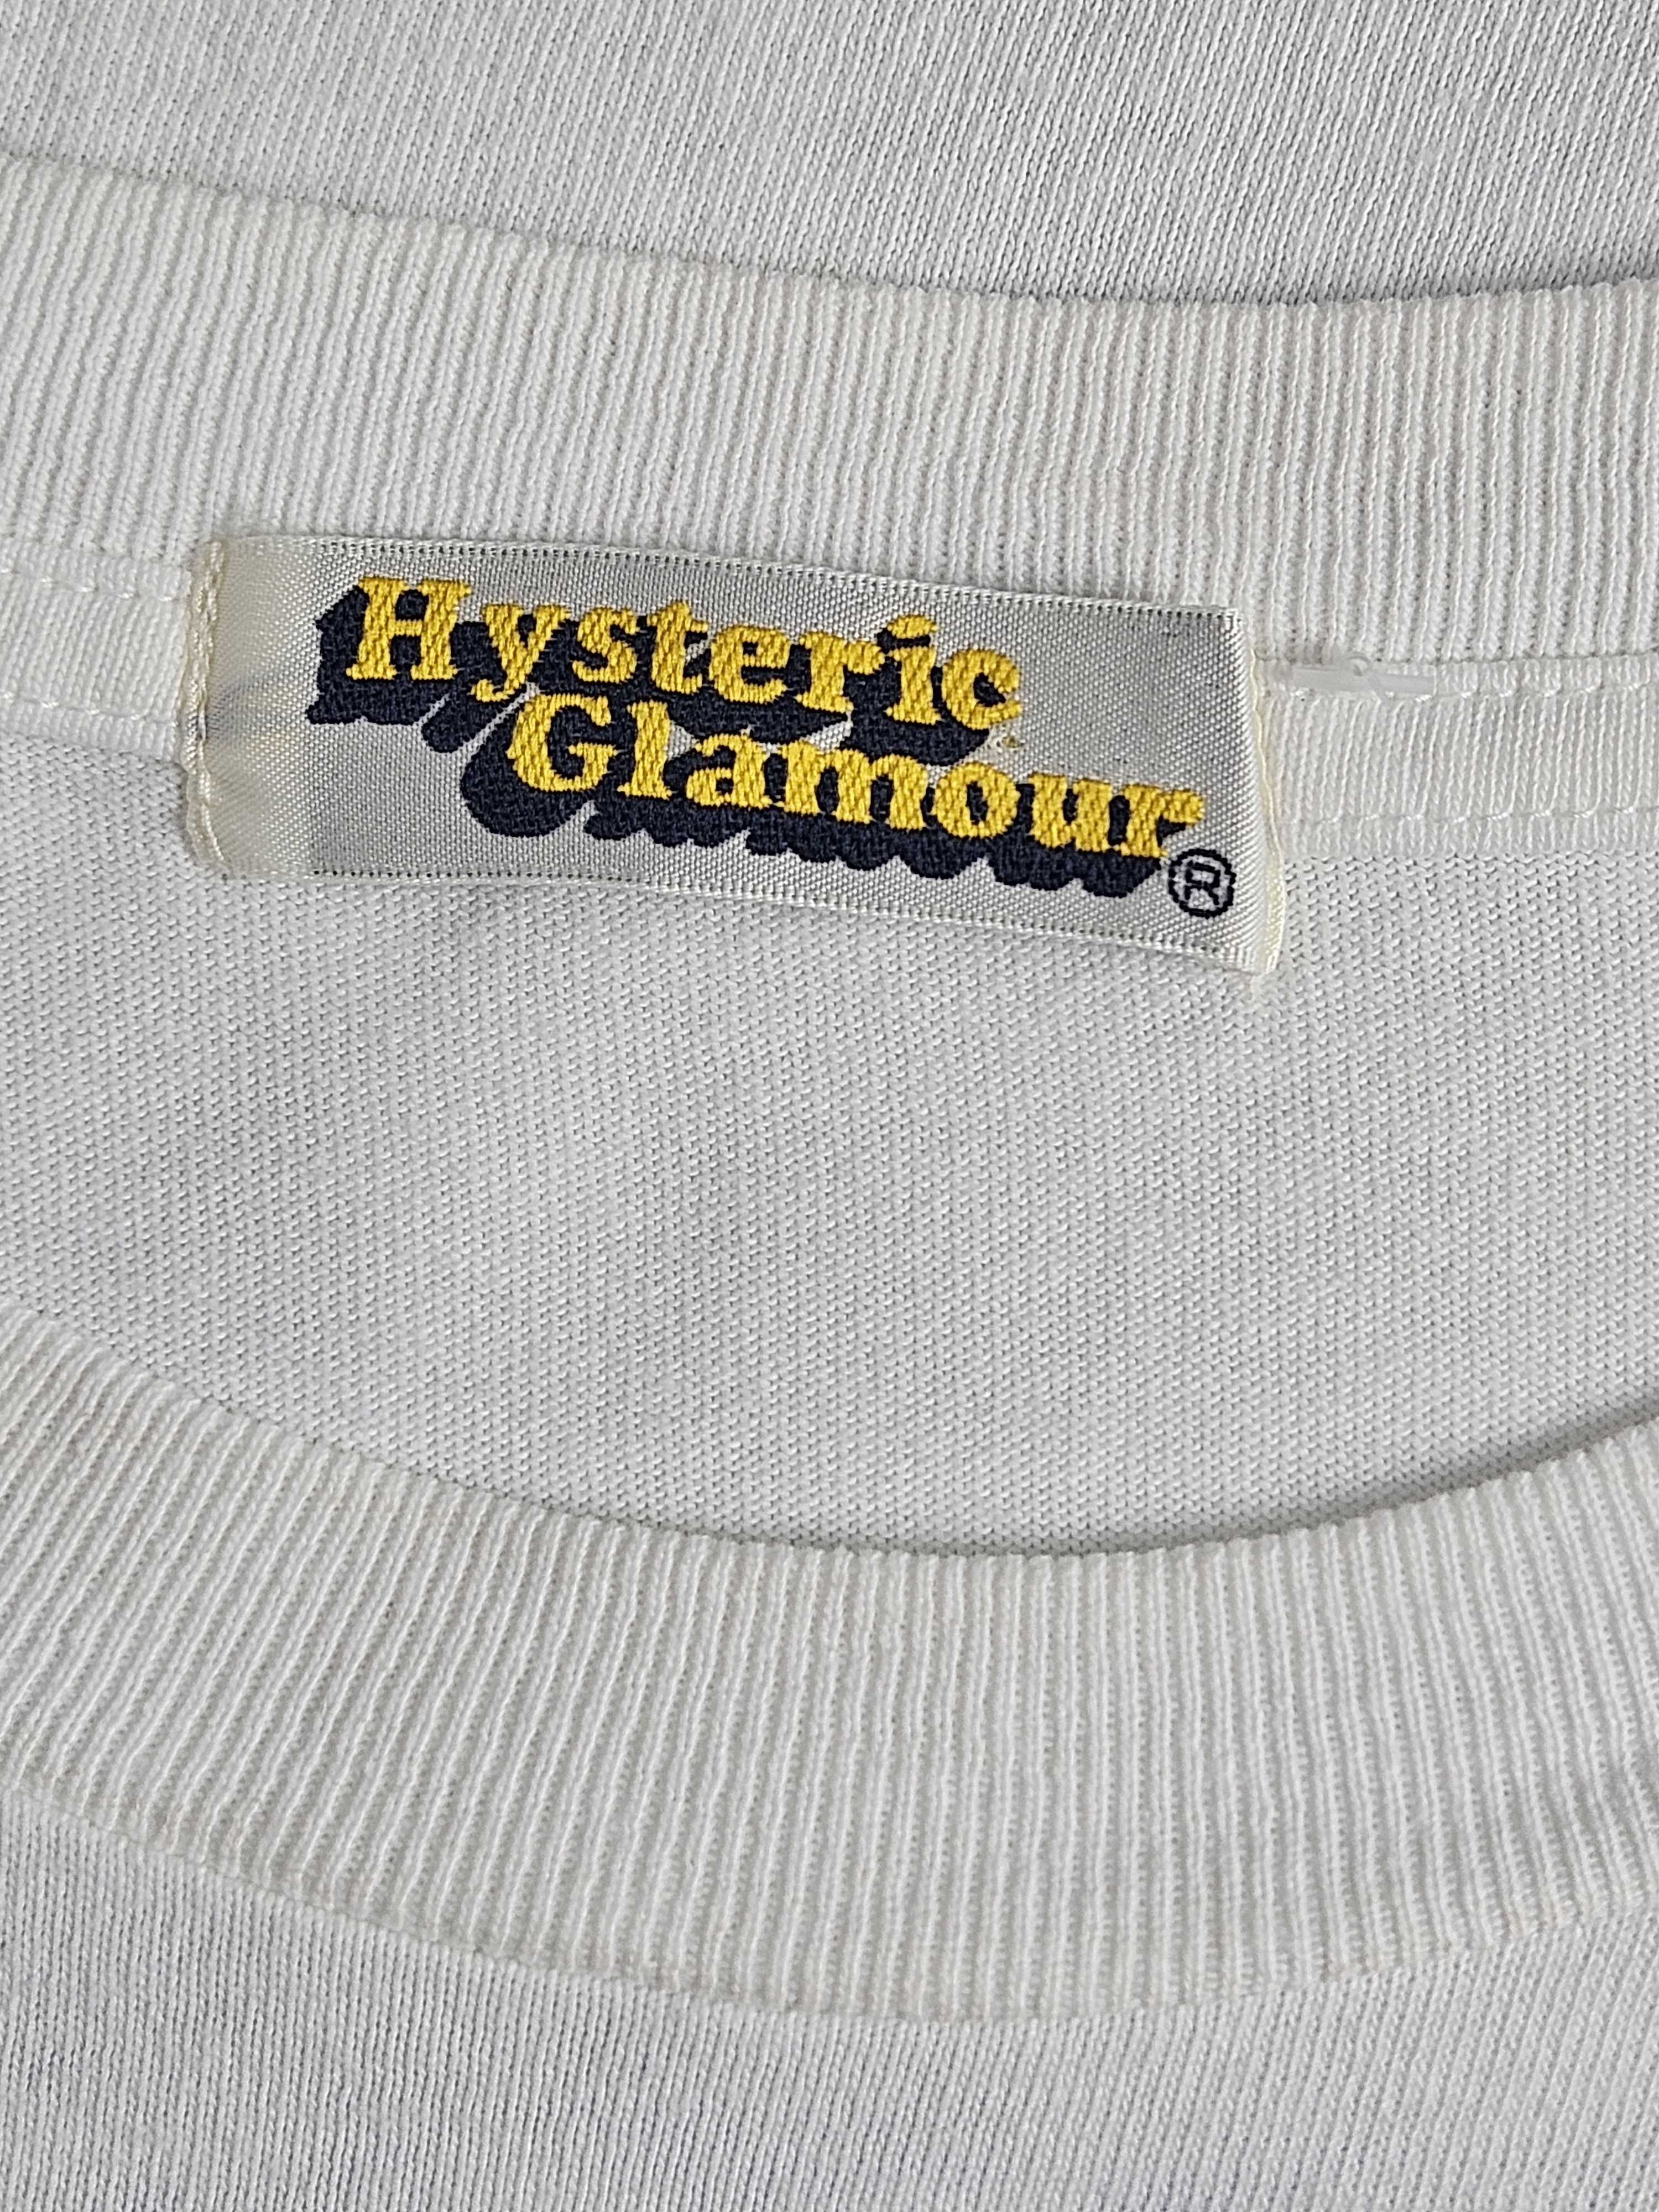 Hysteric Glamour Super Store shirt - 4